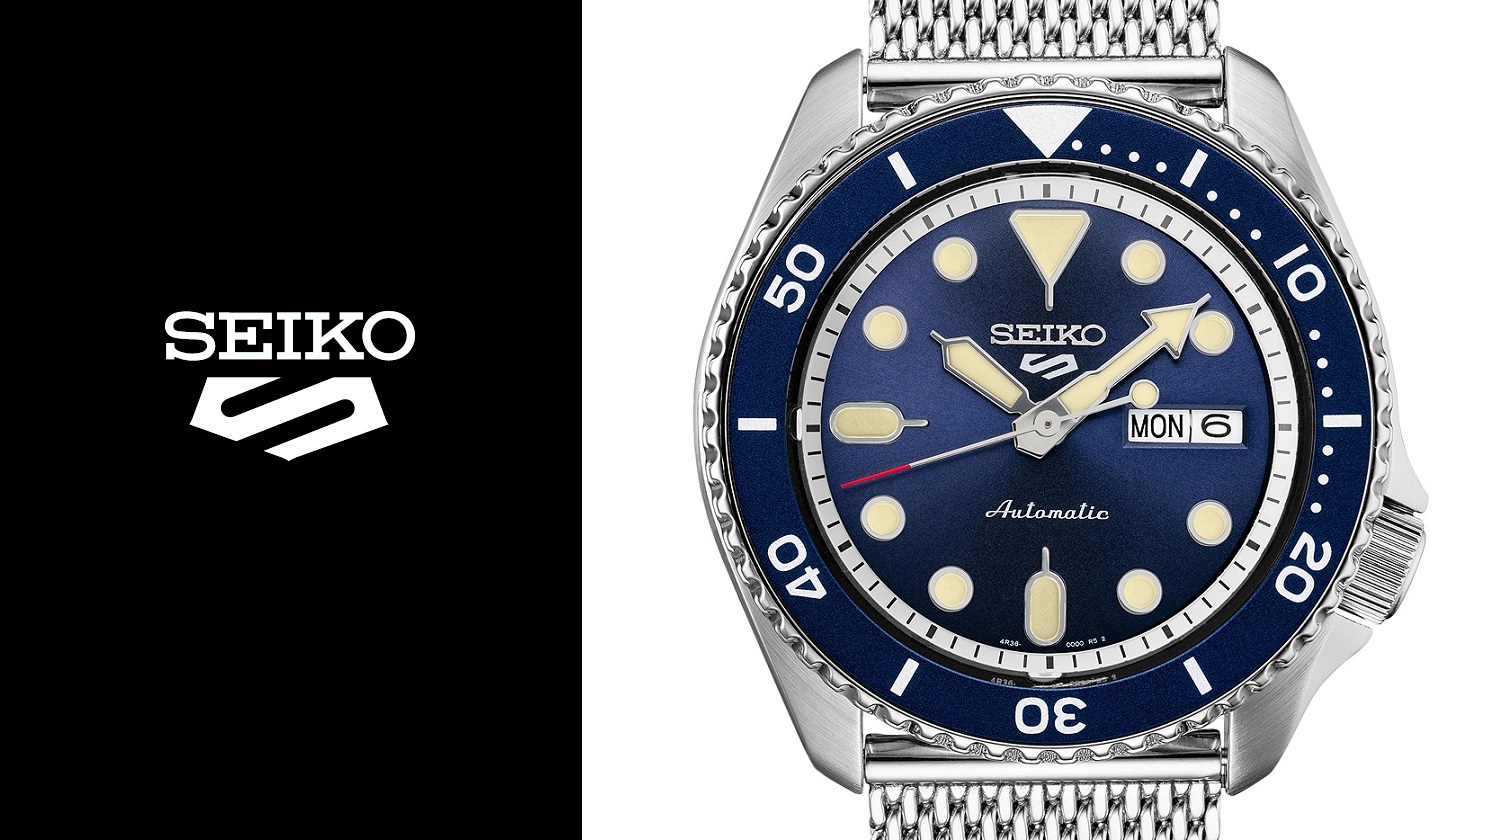 Steal Alert? New Seiko 5 watches are in, and on sale, at Macy's